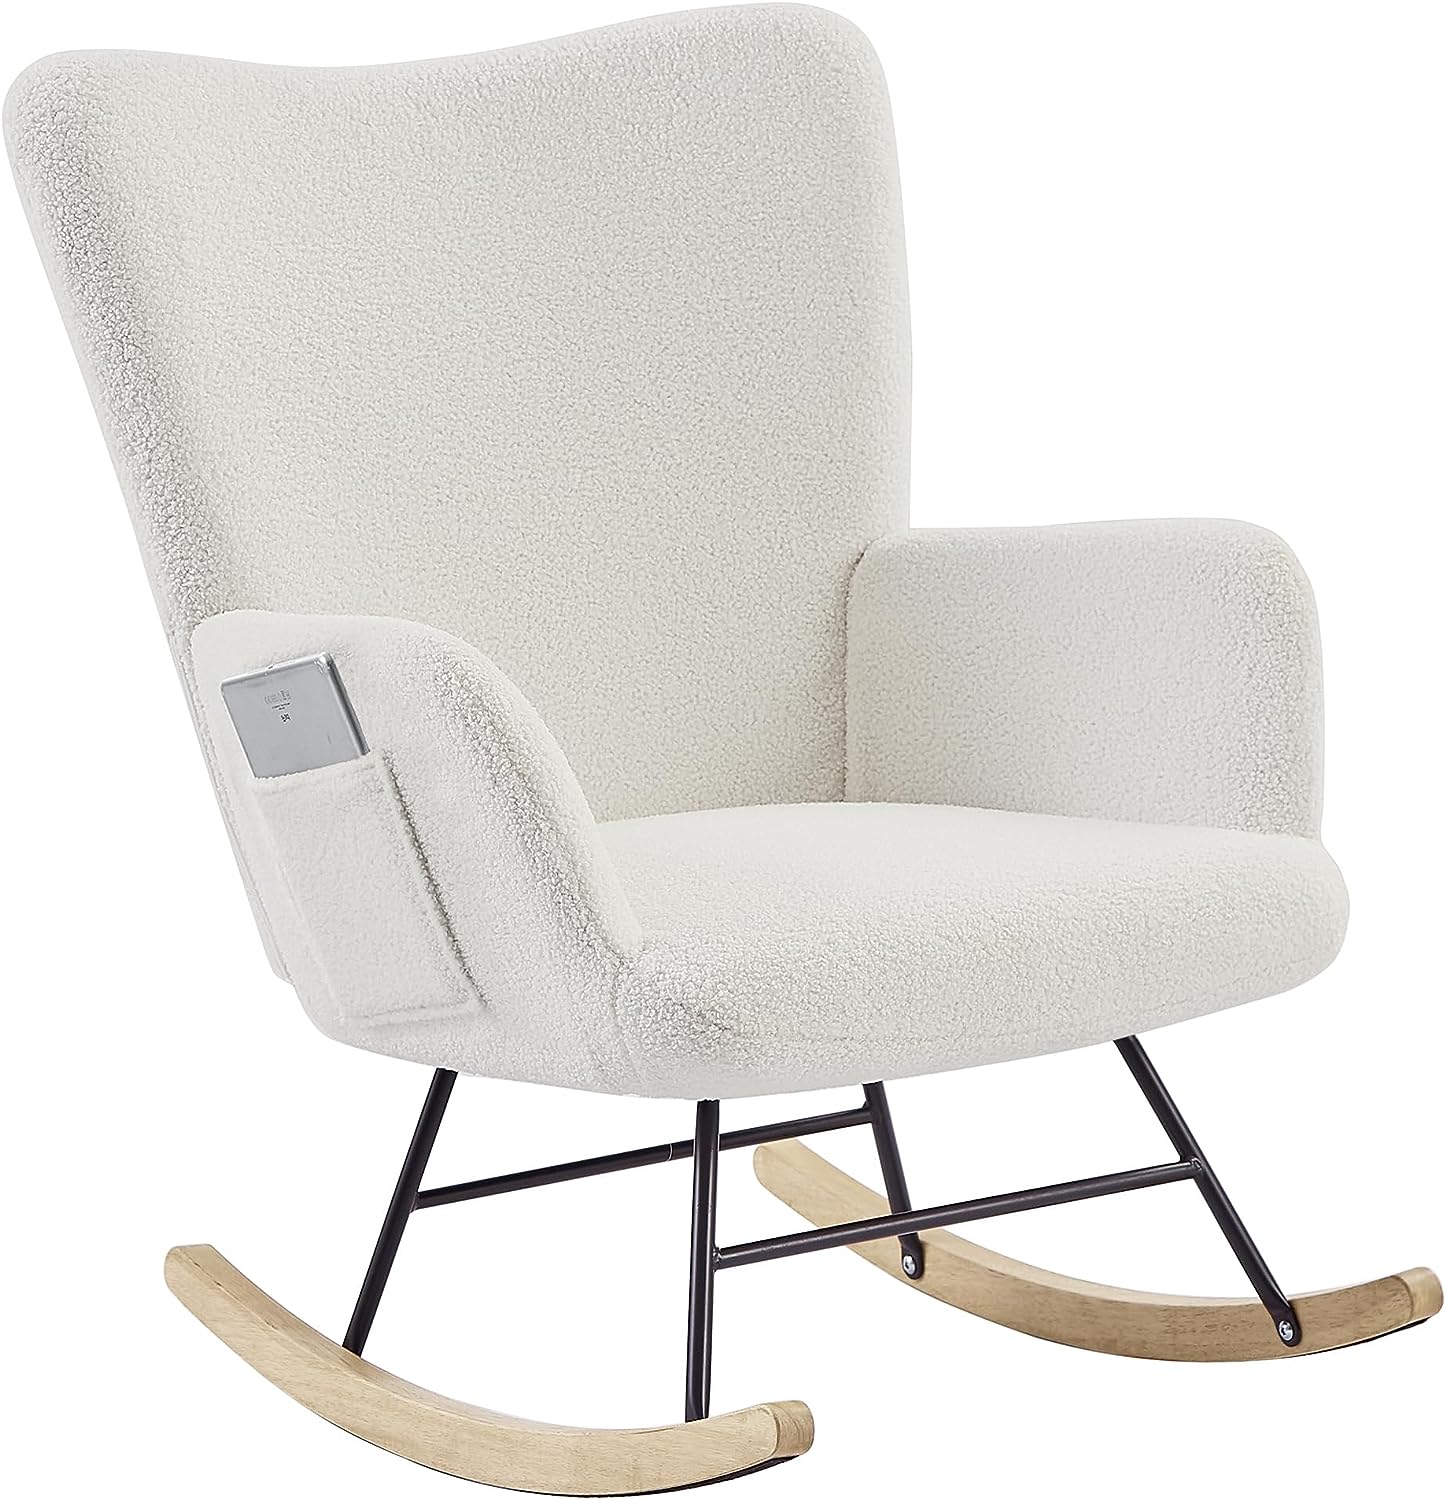 VECELO Rocking Chair, Modern Upholstered Teddy Fabric Nursery Glider with Padded Seat, High Backrest, Armchair and Pocket for Living Room Bedroom Balcony Offices